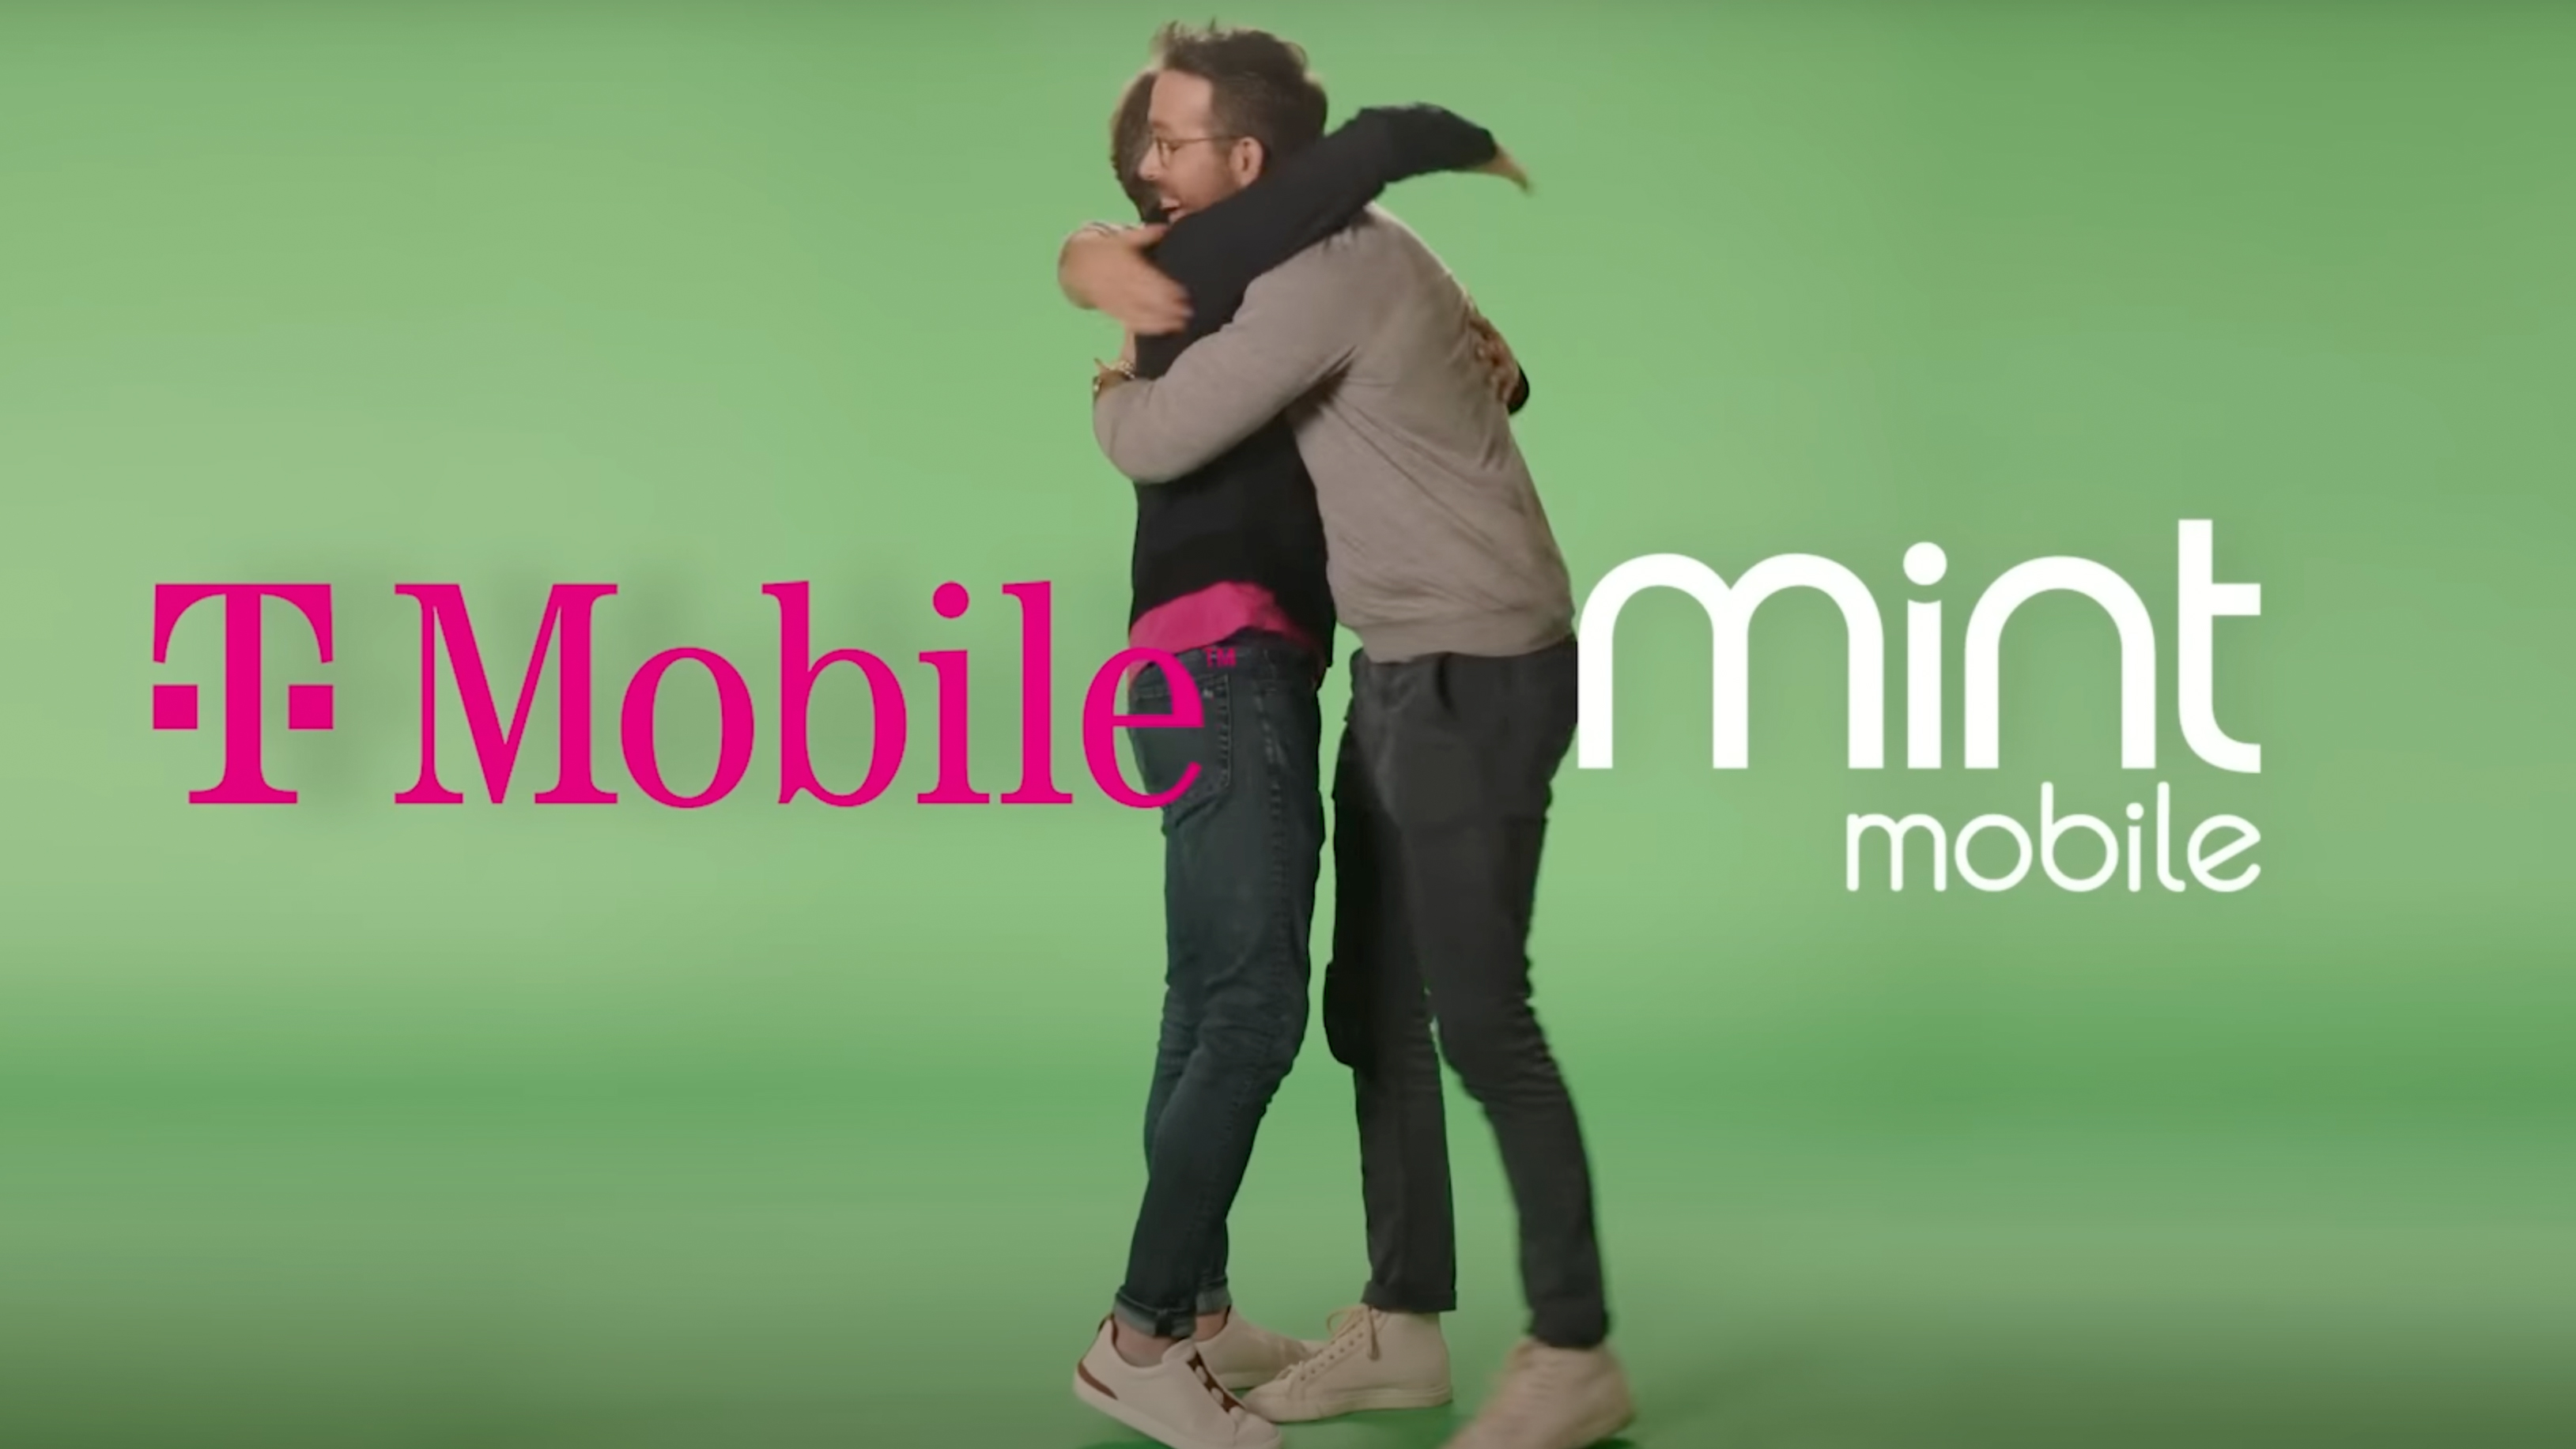 Mint Mobile and T-Mobile buyout announcement hug video screen grab